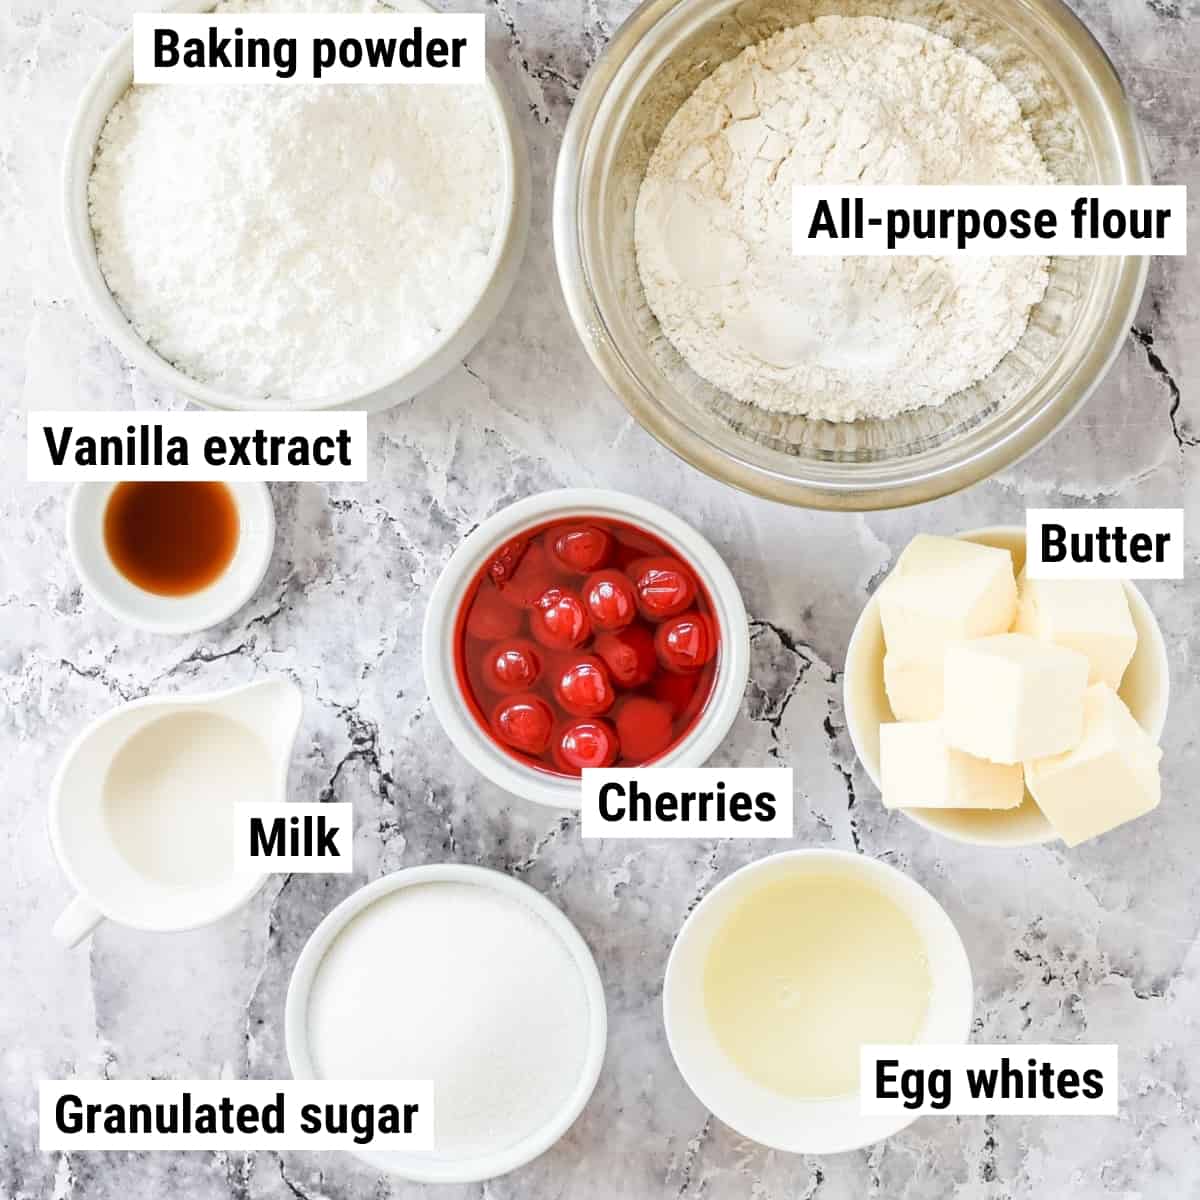 The ingredients to make cherry cupcakes laid out on a table.